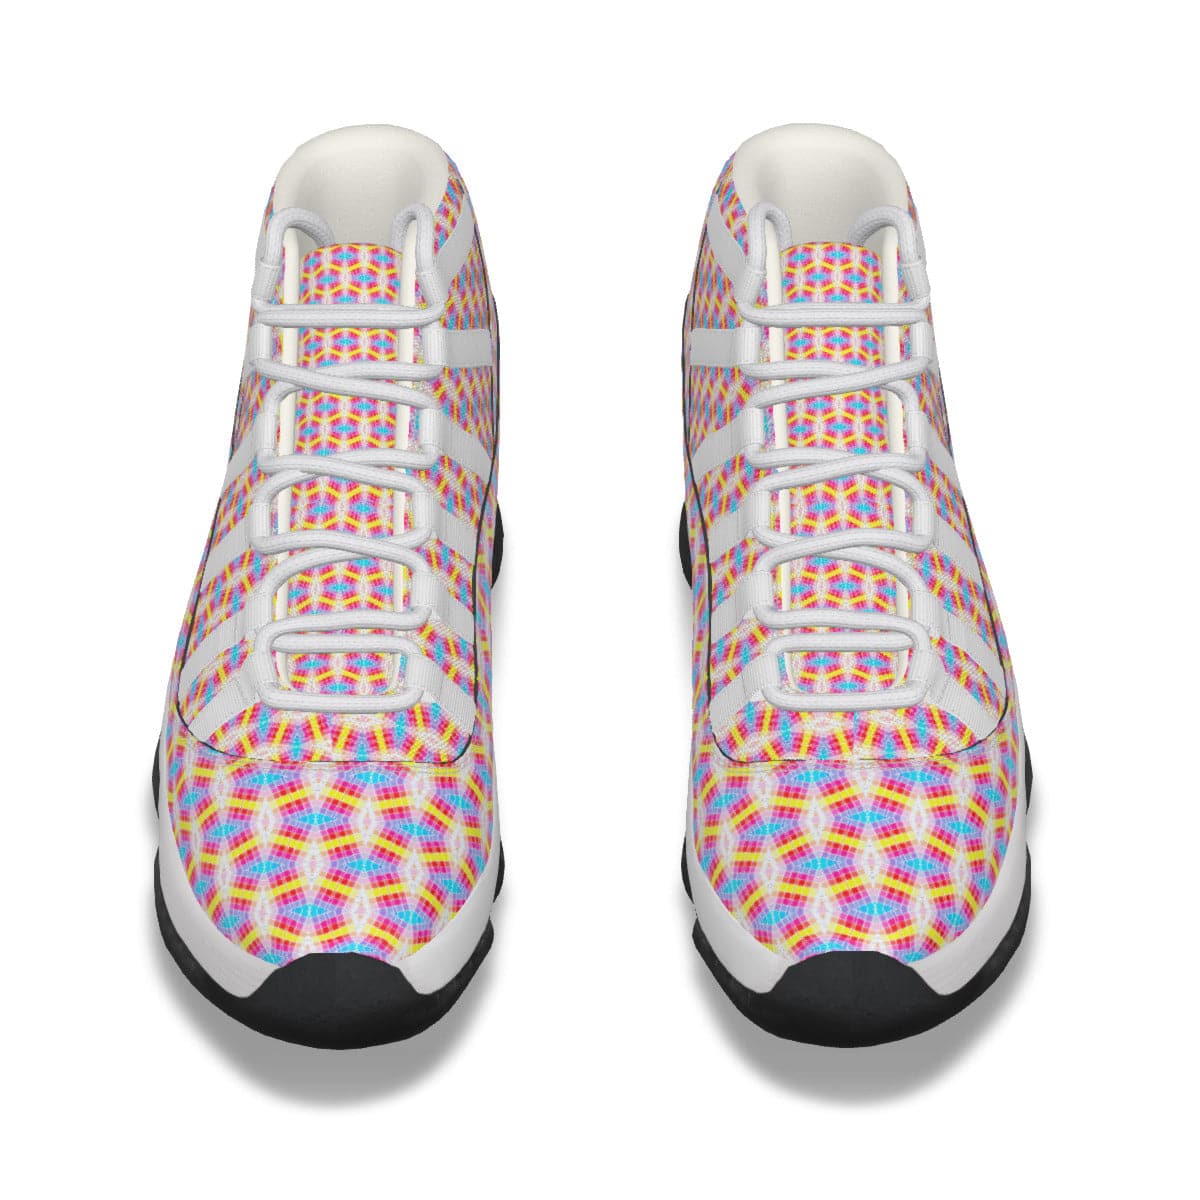 High Top Basketball Shoes with Orange Yellow and Blue Pattern for Men by Sensus Studio Design